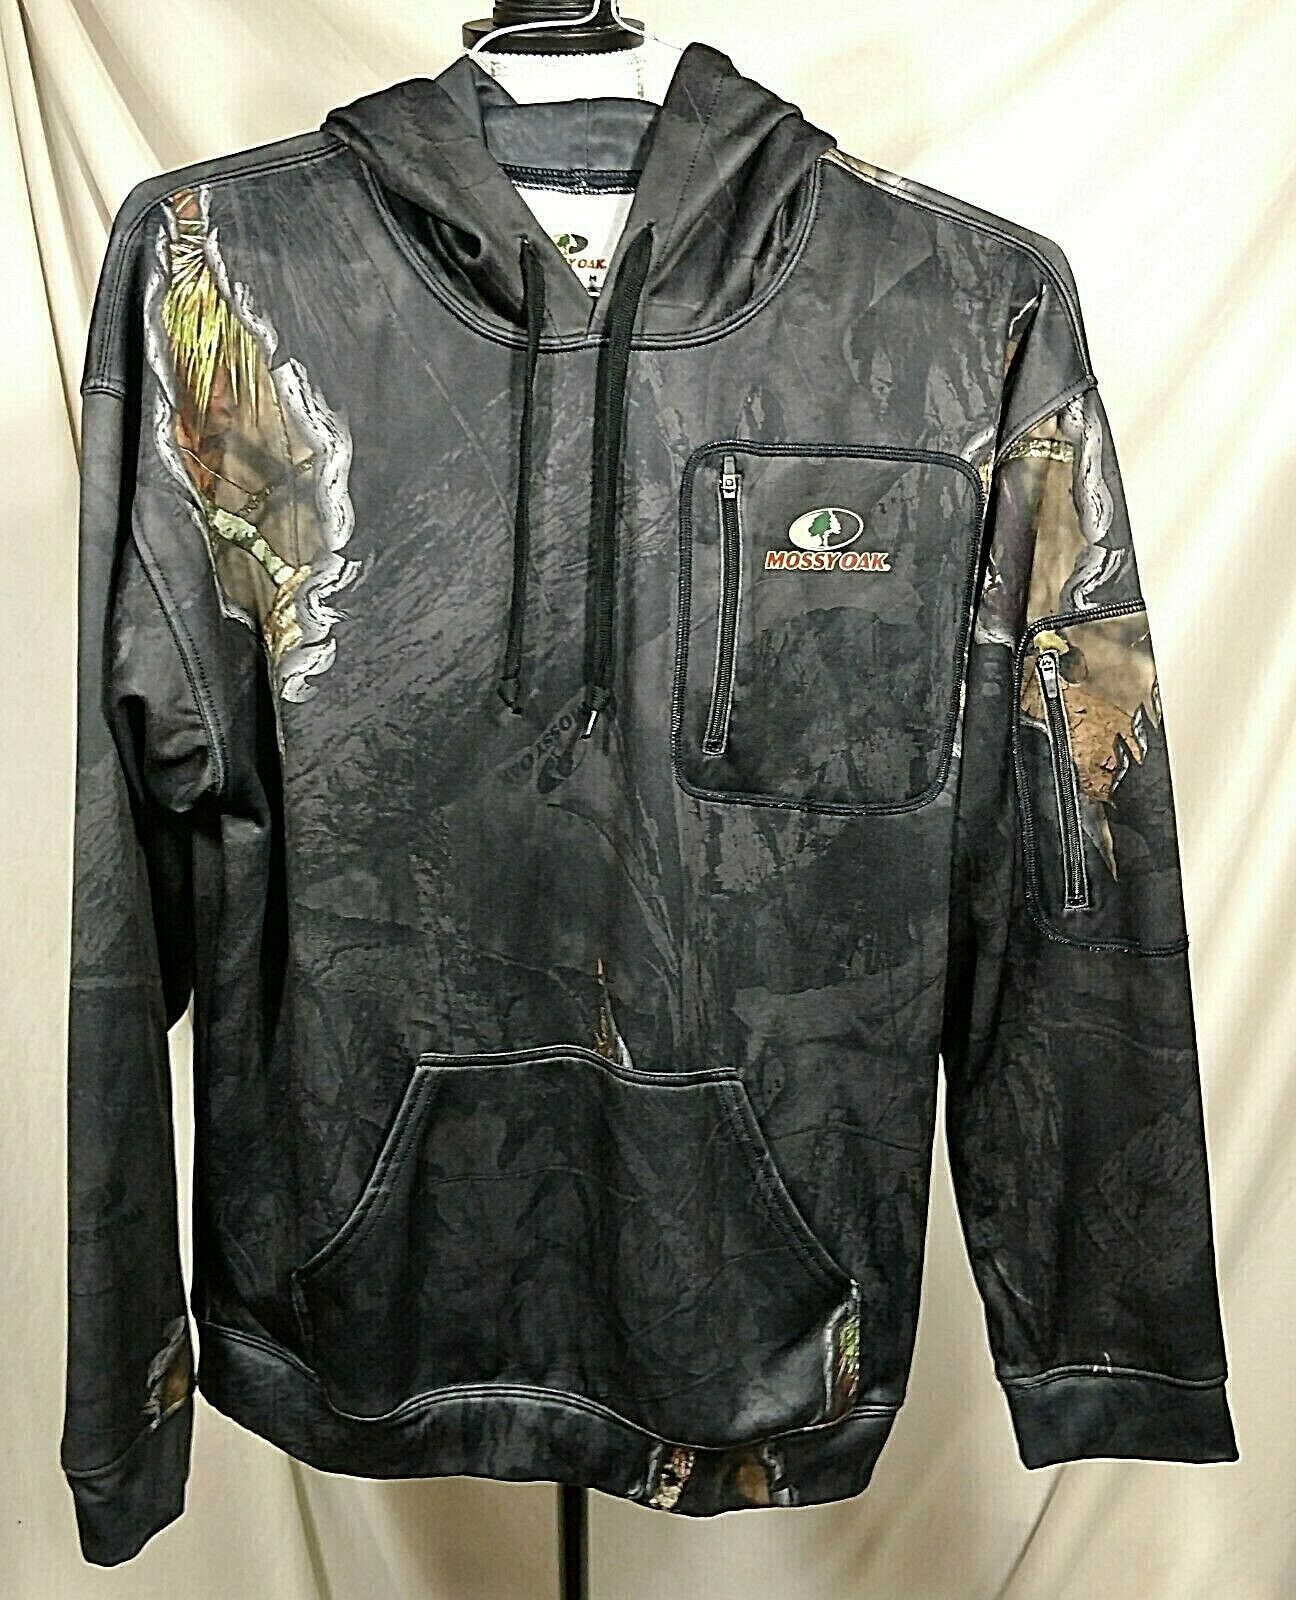 Mossy Oak Hoodie Technical Pullover Mens Medium Hunting Camo New Fleece Lined M